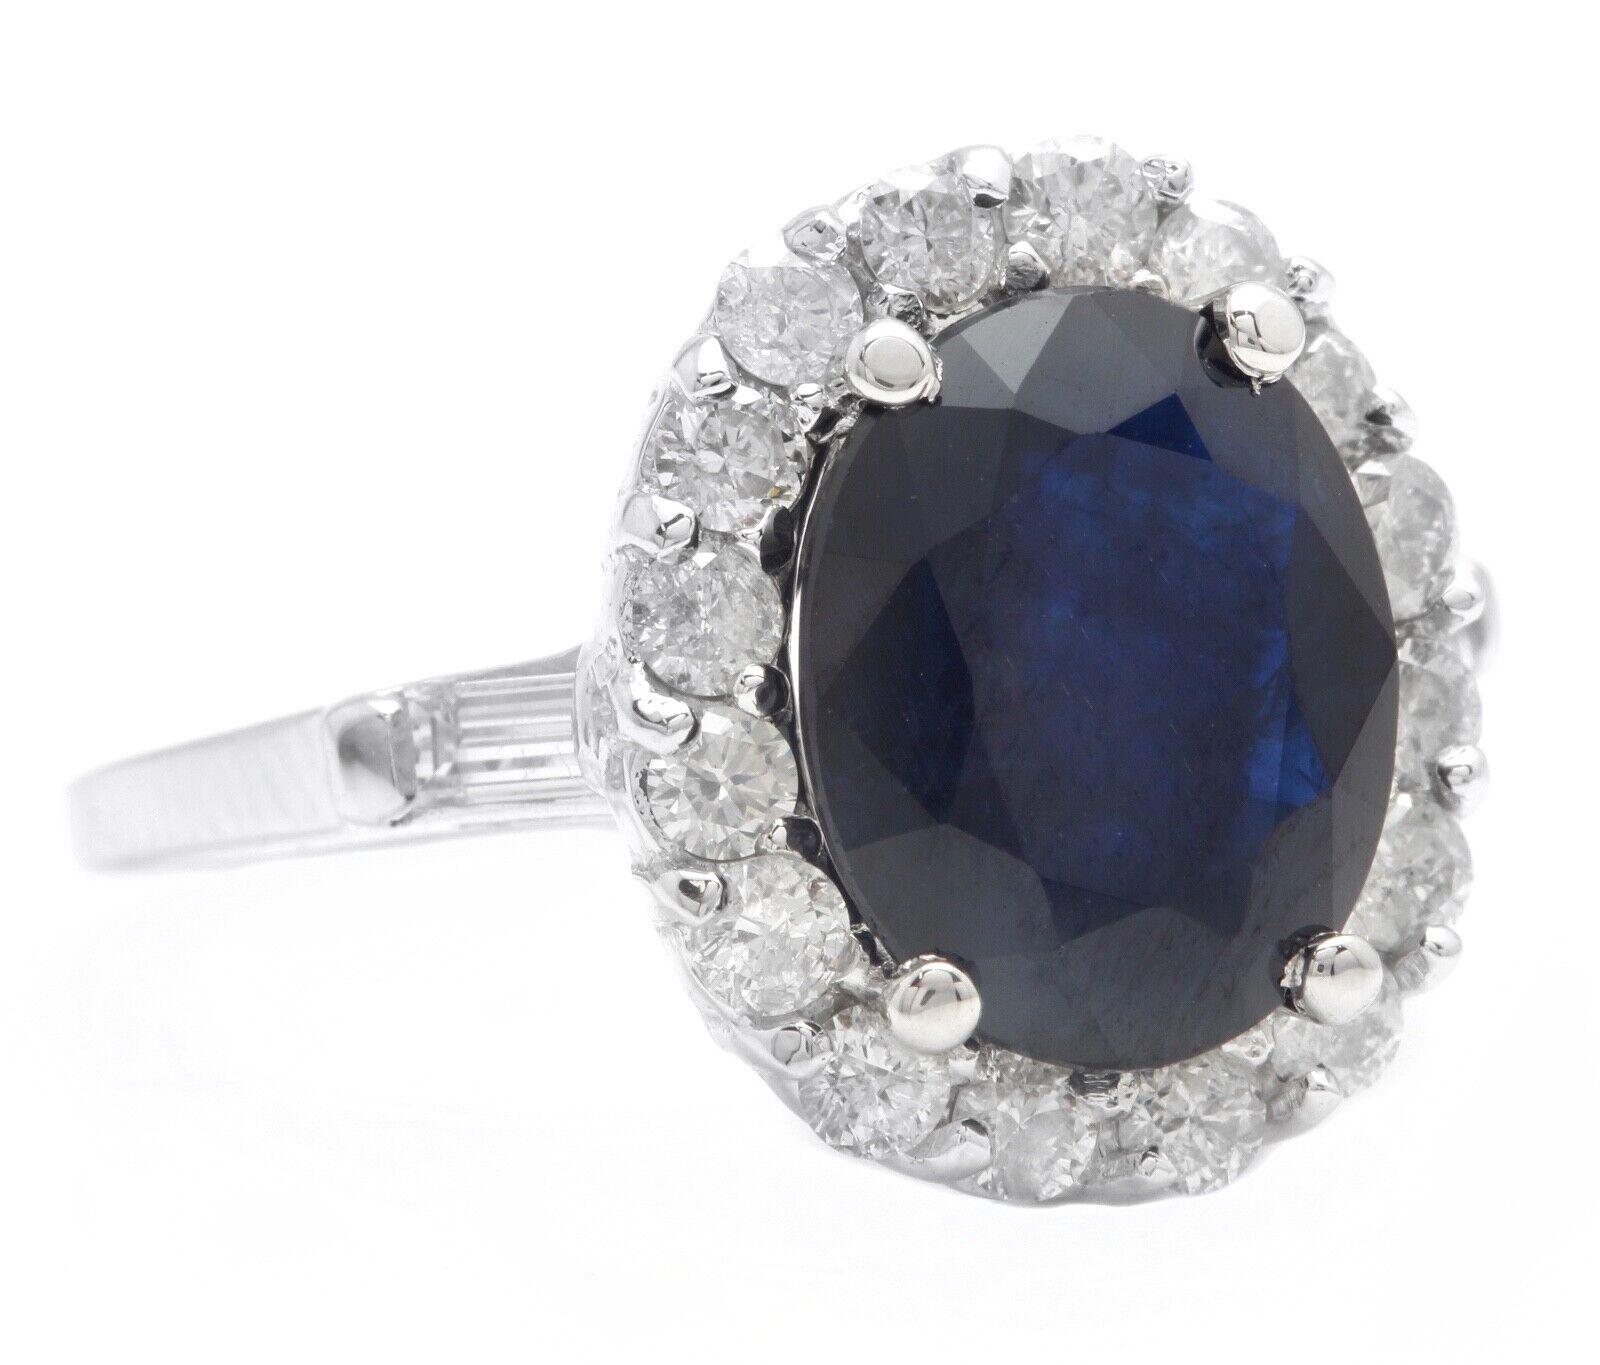 4.85 Carats Exquisite Natural Blue Sapphire and Diamond 14K Solid White Gold Ring

Suggested Replacement Value $6,000.00

Total Blue Sapphire Weight is: Approx. 4.00 Carats (Diffused)

Sapphire Measures: Approx. 10.80 x 8.80mm

Natural Round &